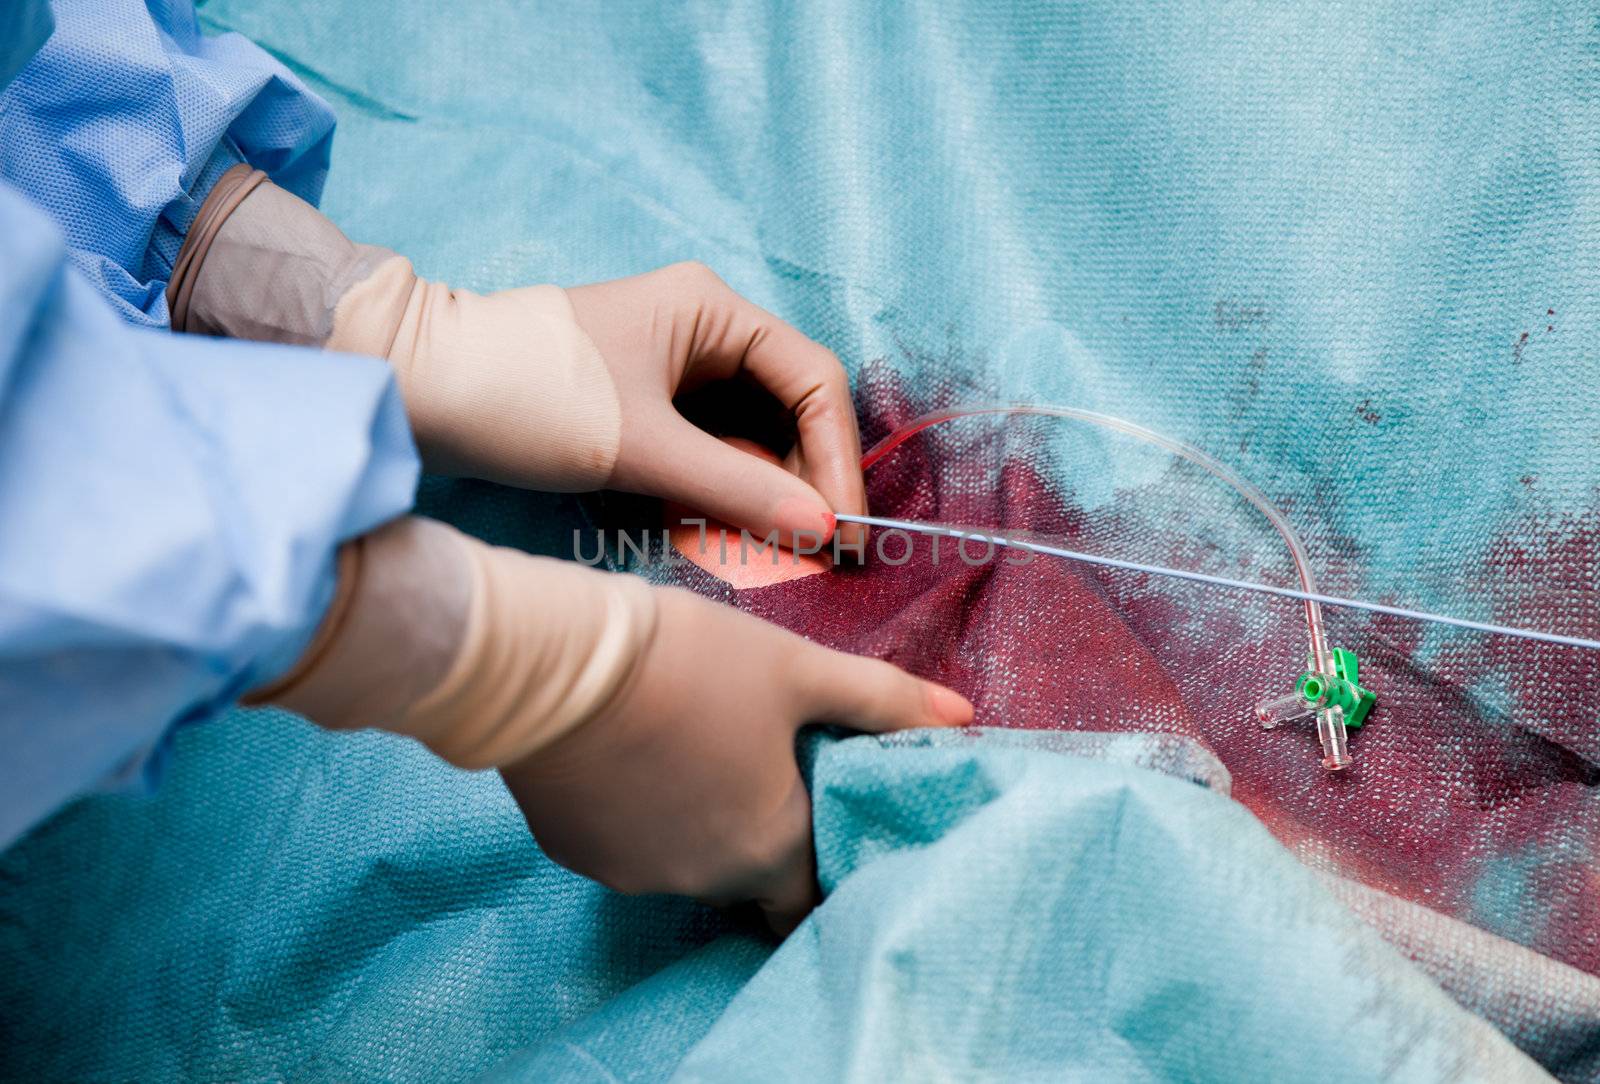 Close-up of hands with gloves placing coronarography catheter in patient